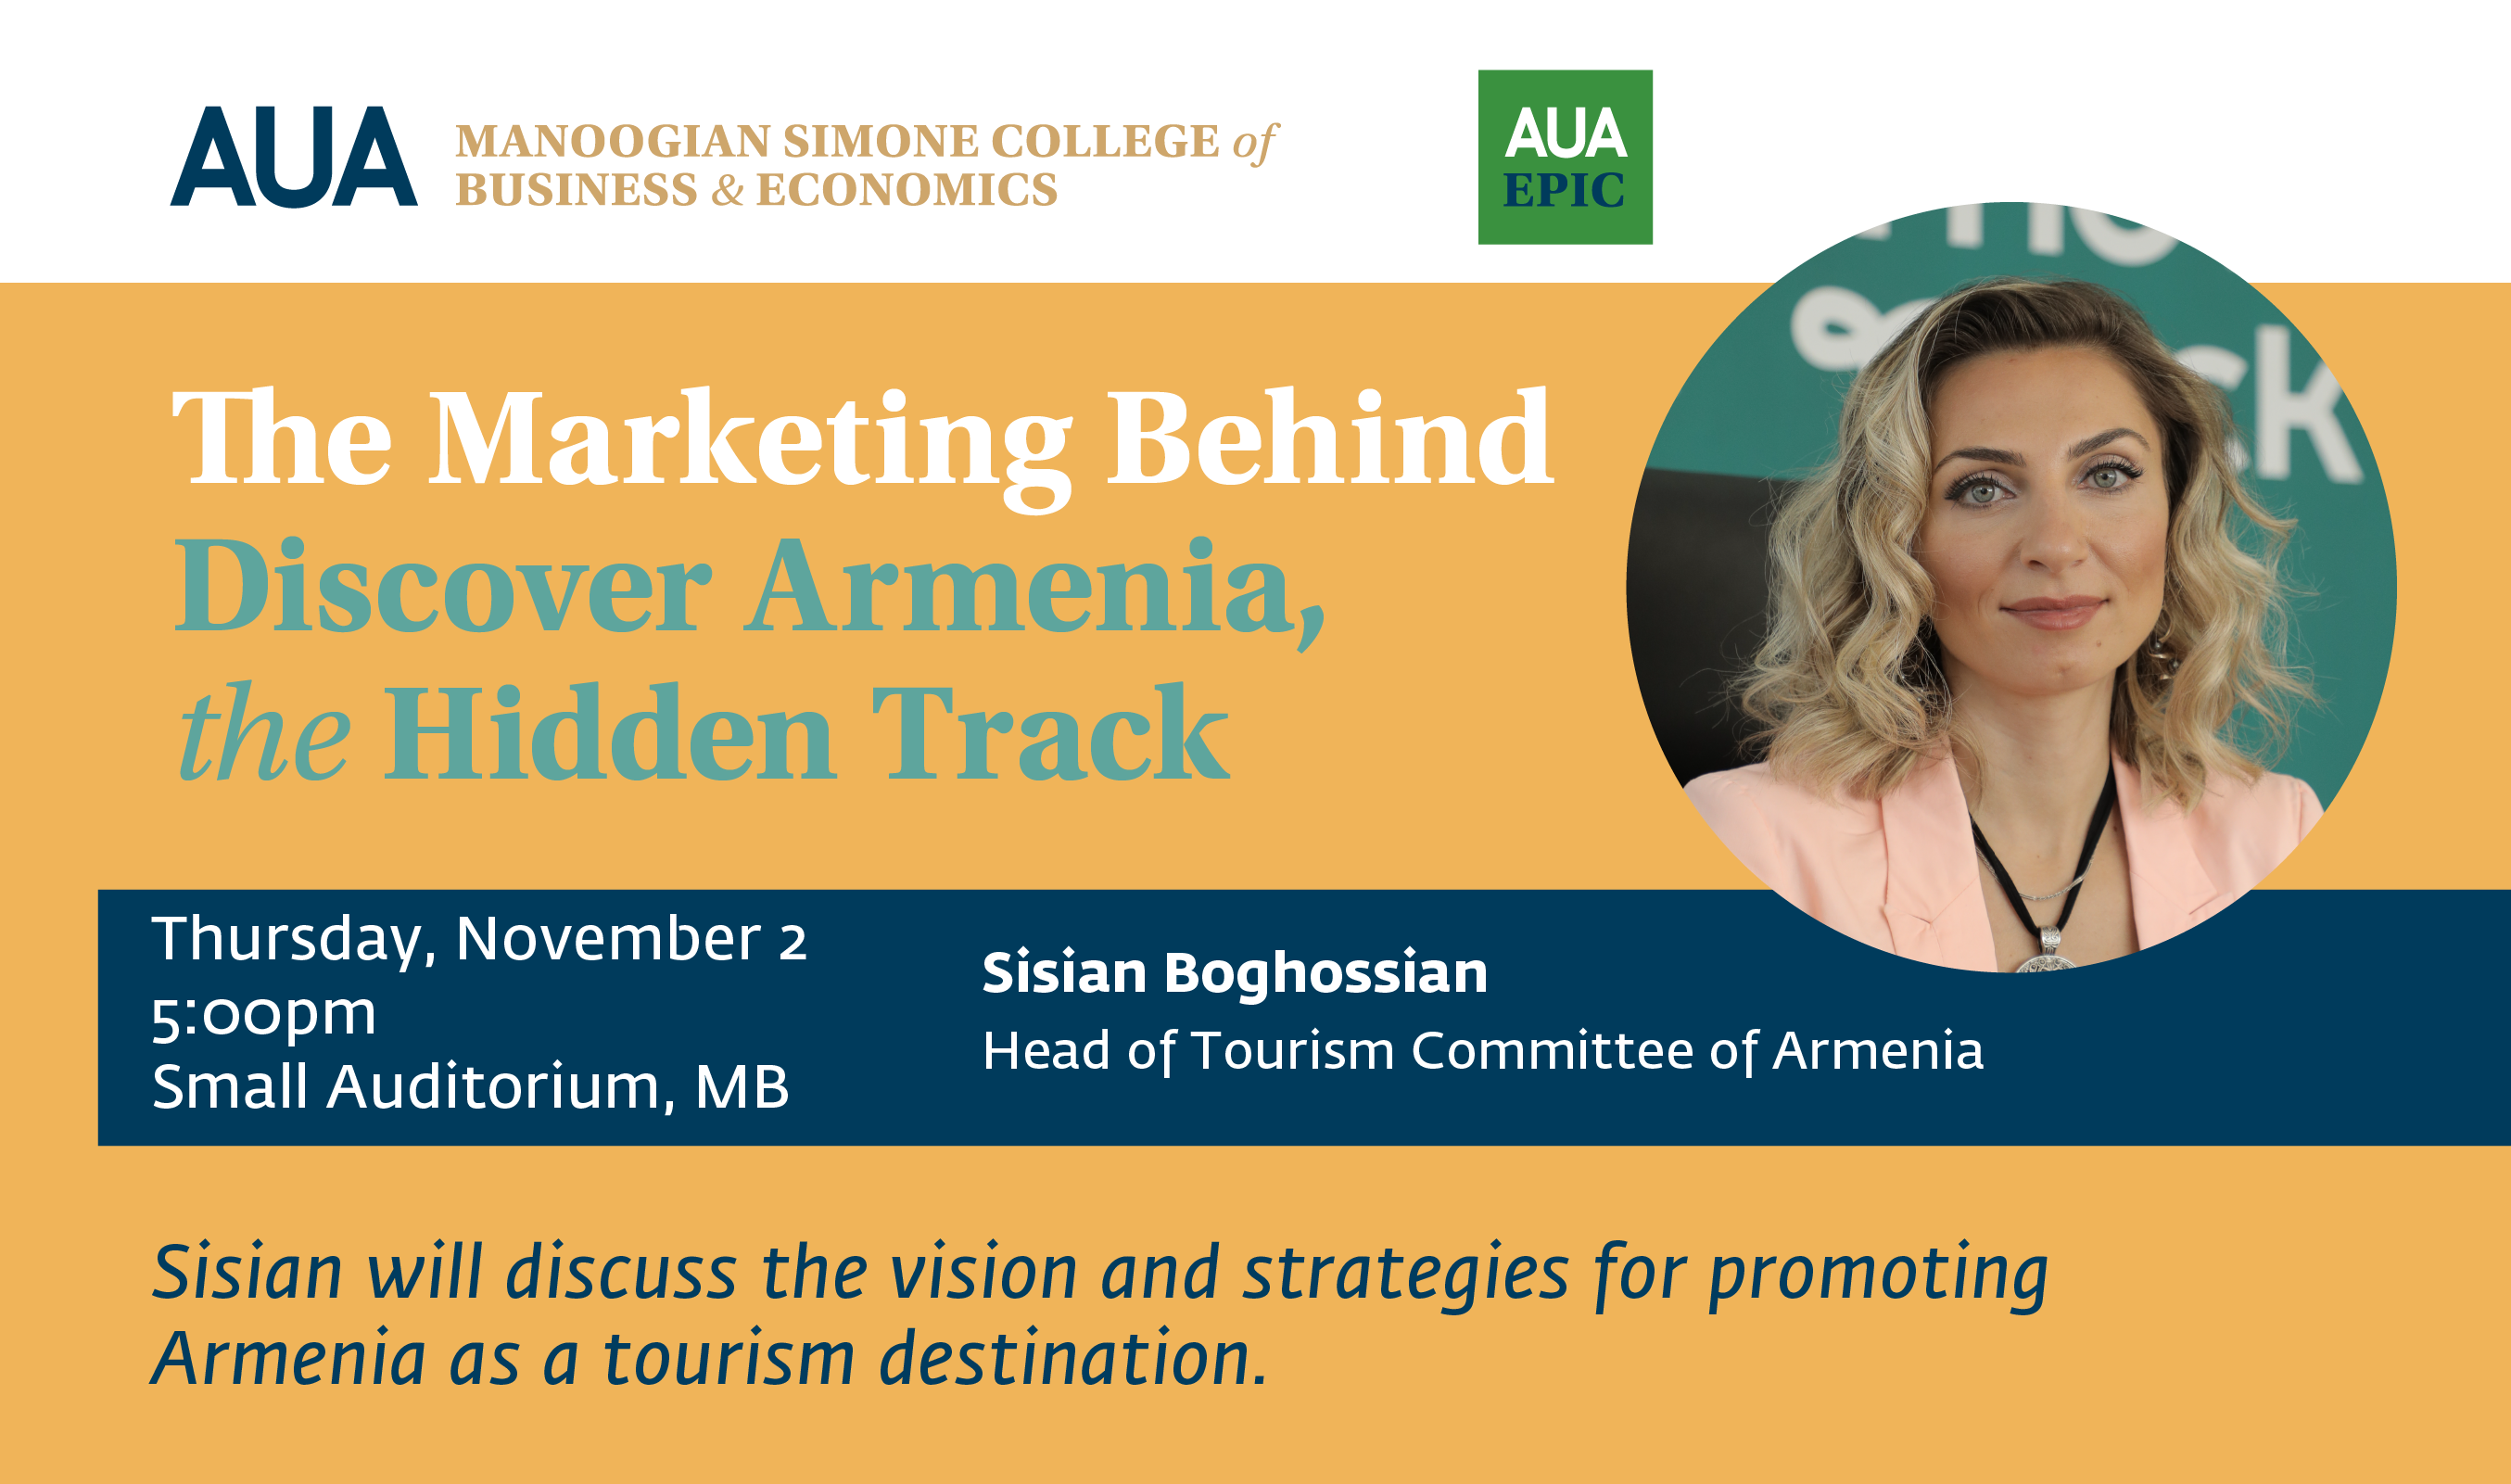 The Marketing Behind Discover Armenia, the Hidden Track